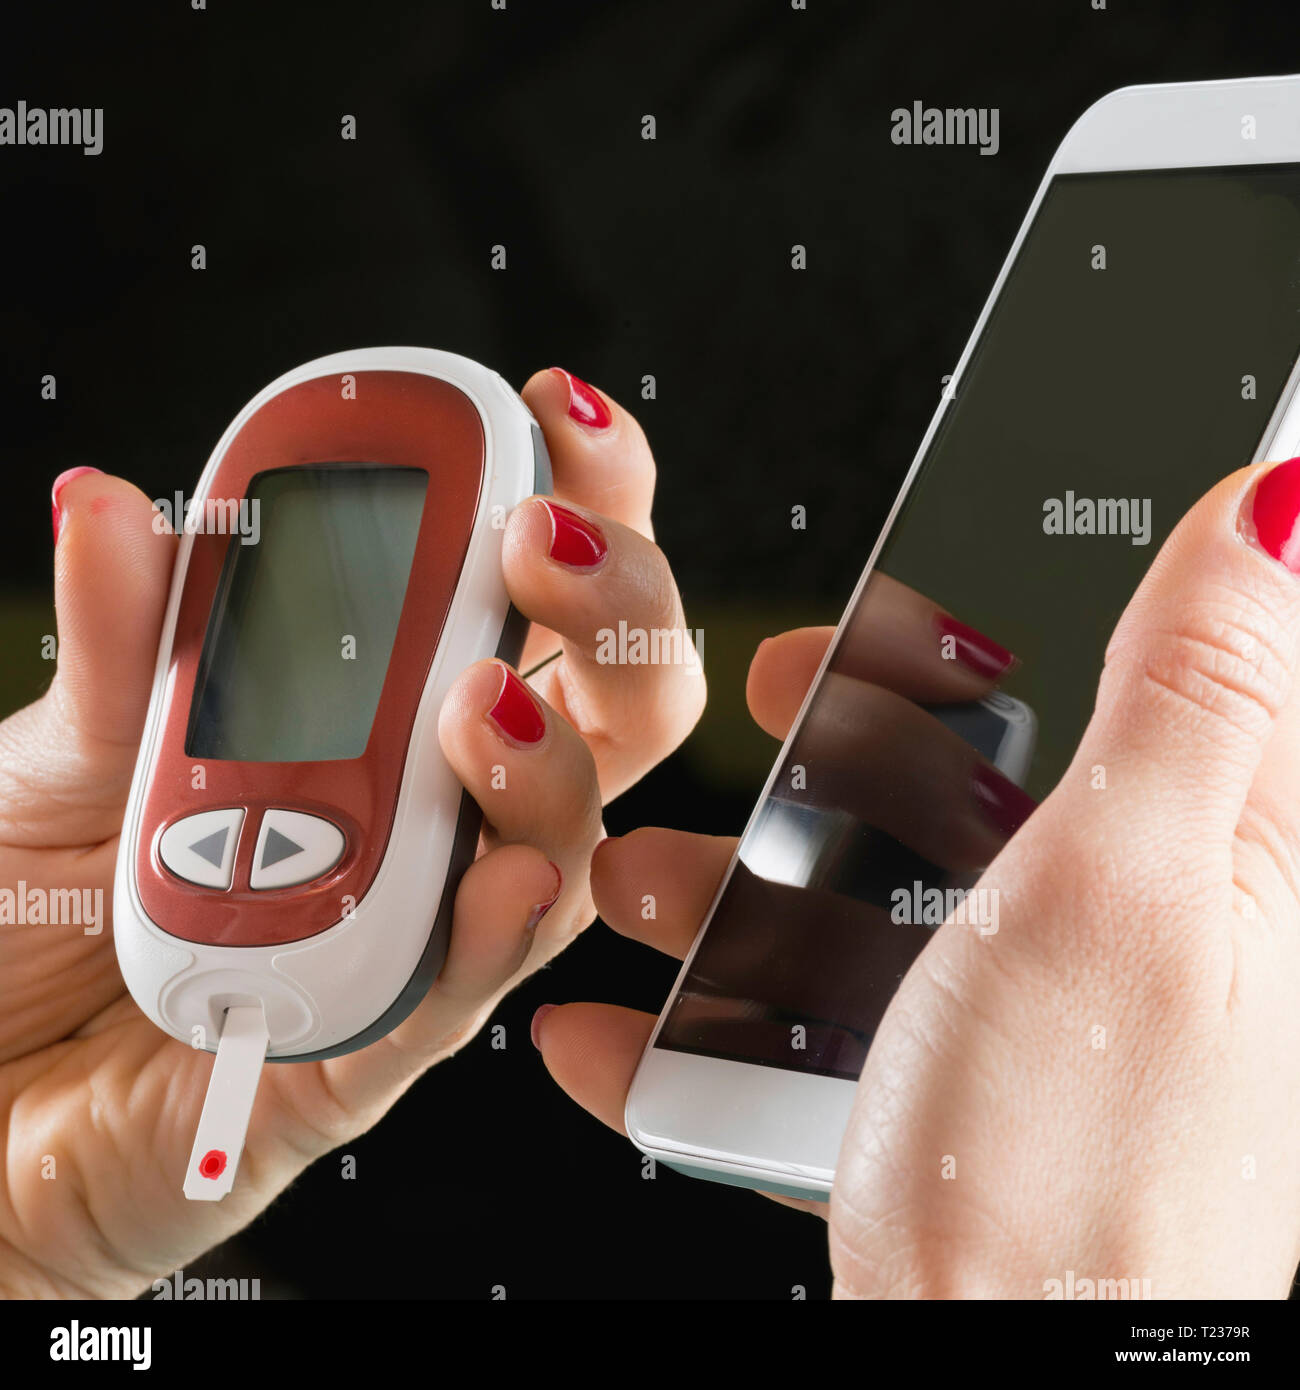 Mobile healthcare technology. Using smart phone with blood sugar testing device. Stock Photo